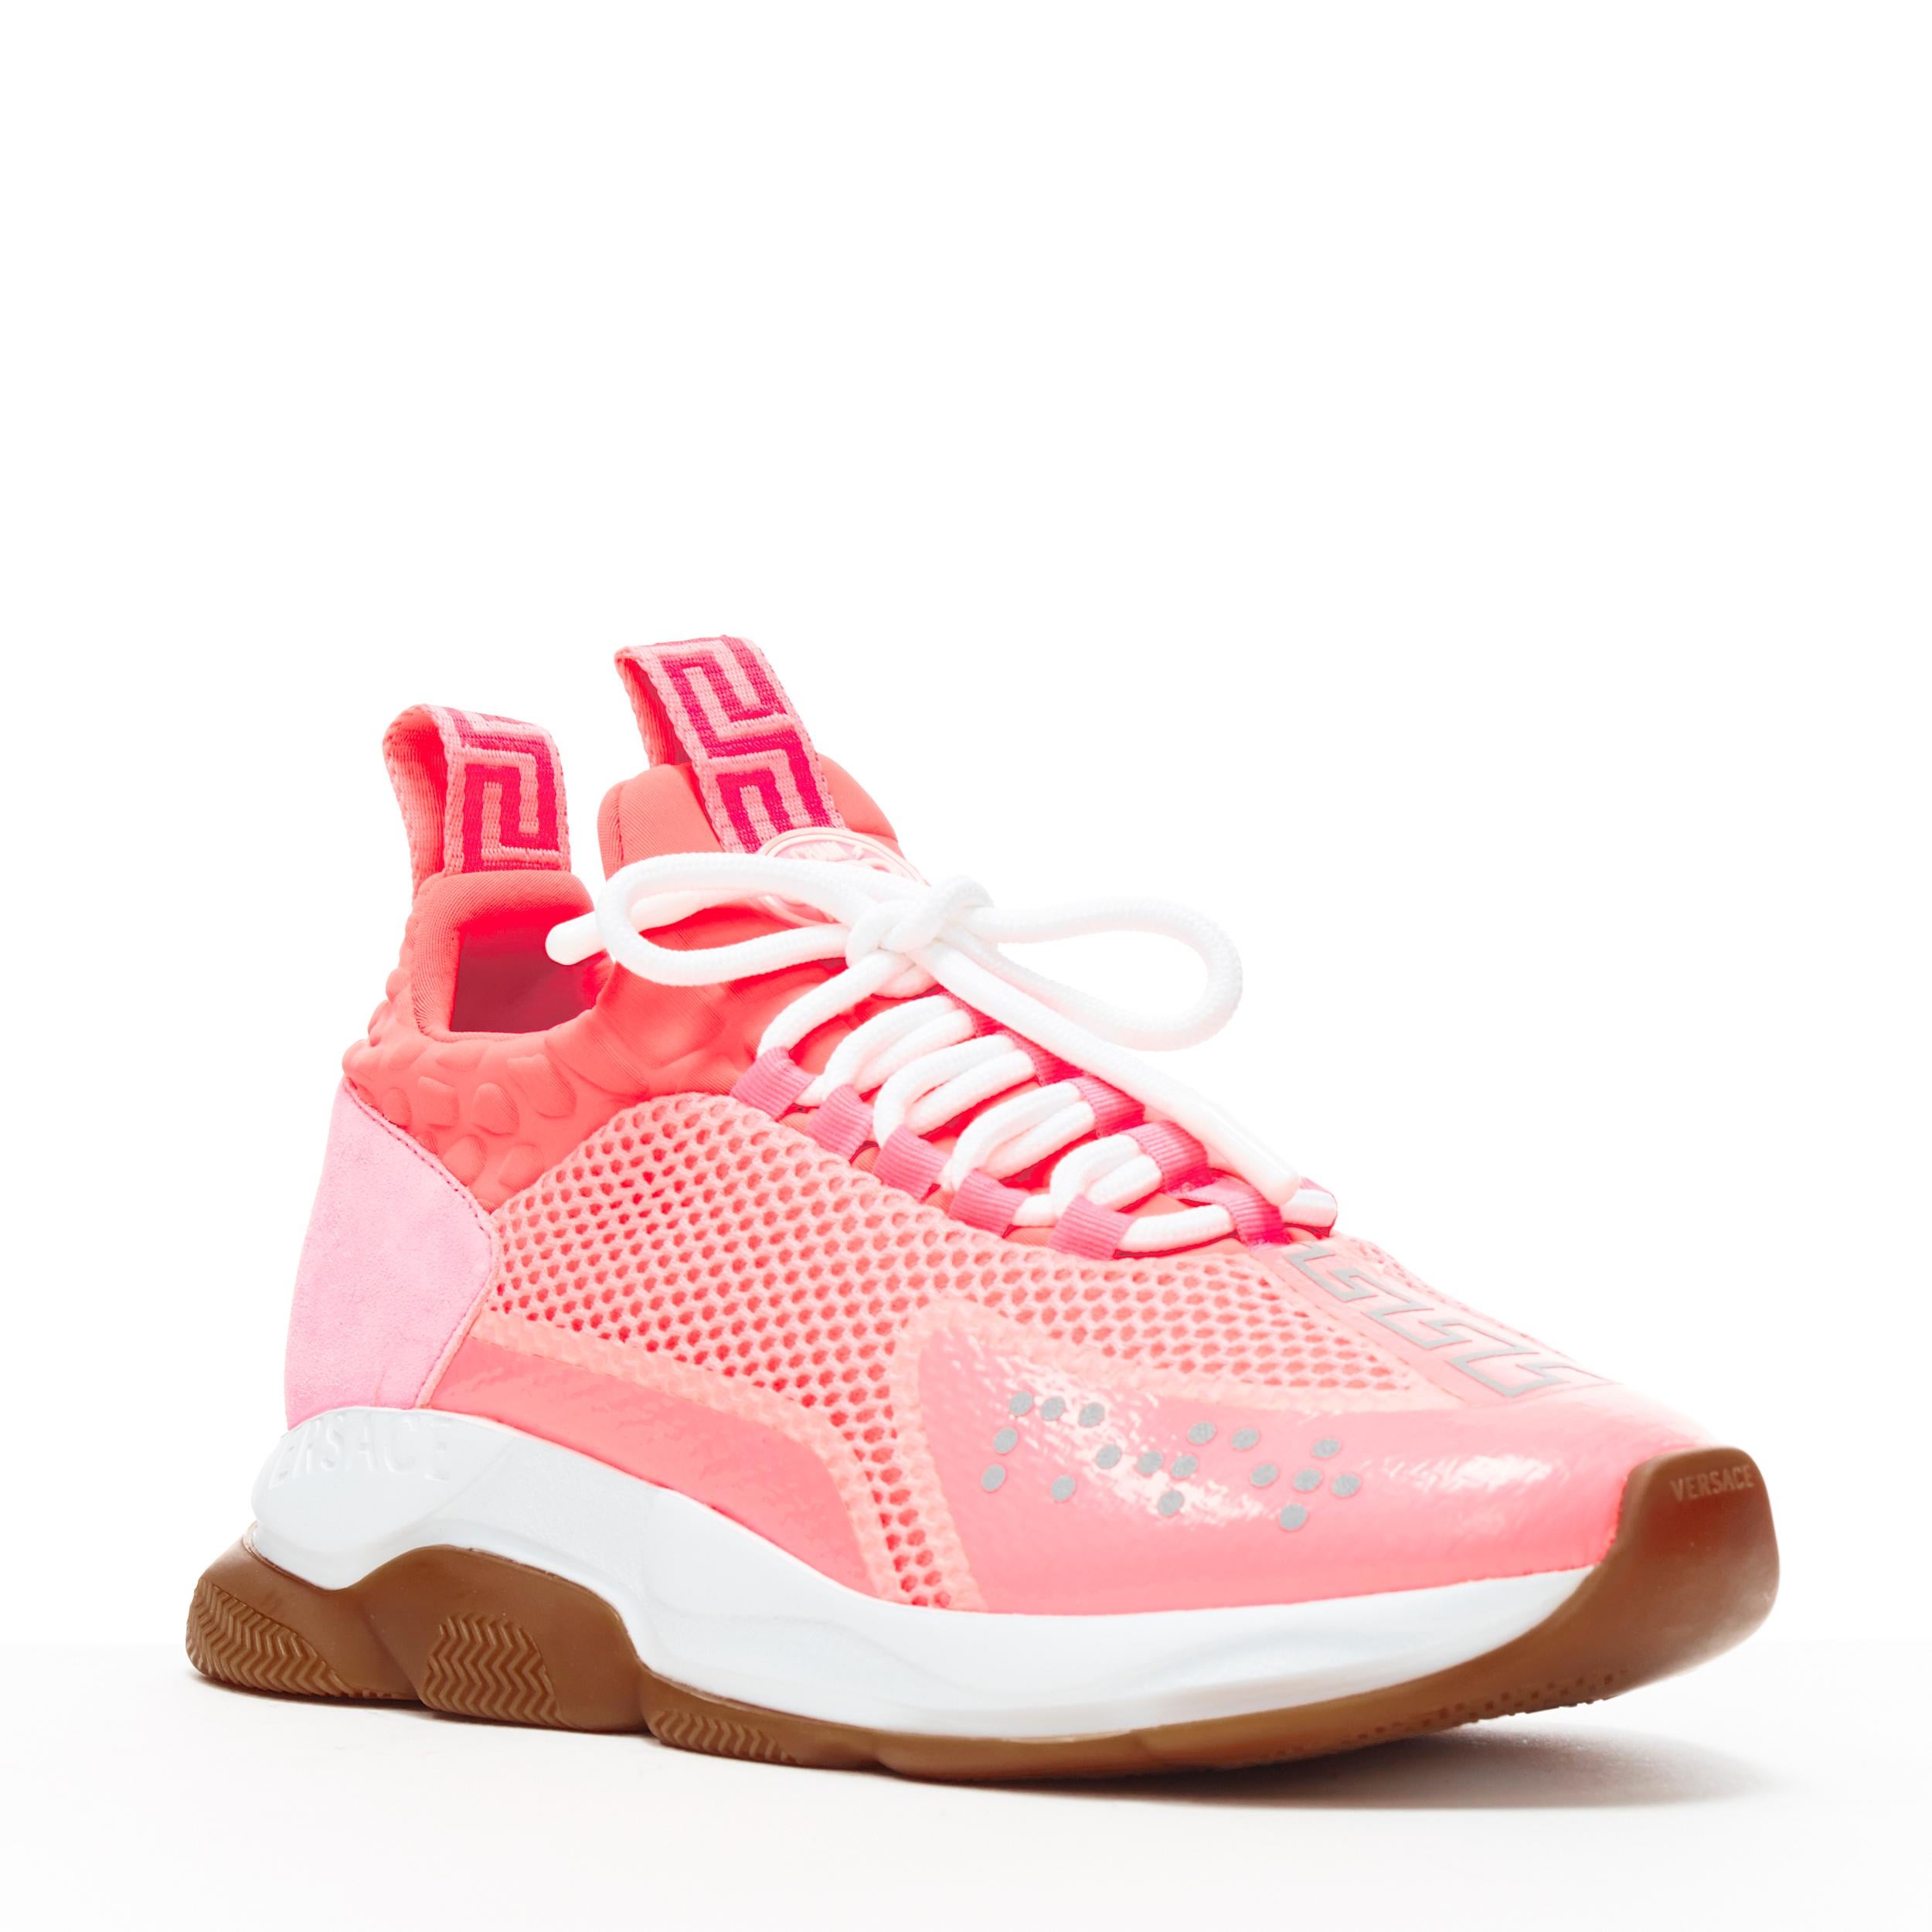 new VERSACE Cross Chainer fluorescent neon pink mesh low top sneaker EU45 US12 
Reference: TGAS/A06274 
Brand: Versace 
Designer: Salehe Bembury 
Model: Cross Chainer Neon Pink 
Material: Leather 
Color: Pink 
Pattern: Solid 
Closure: Lace up 
Extra